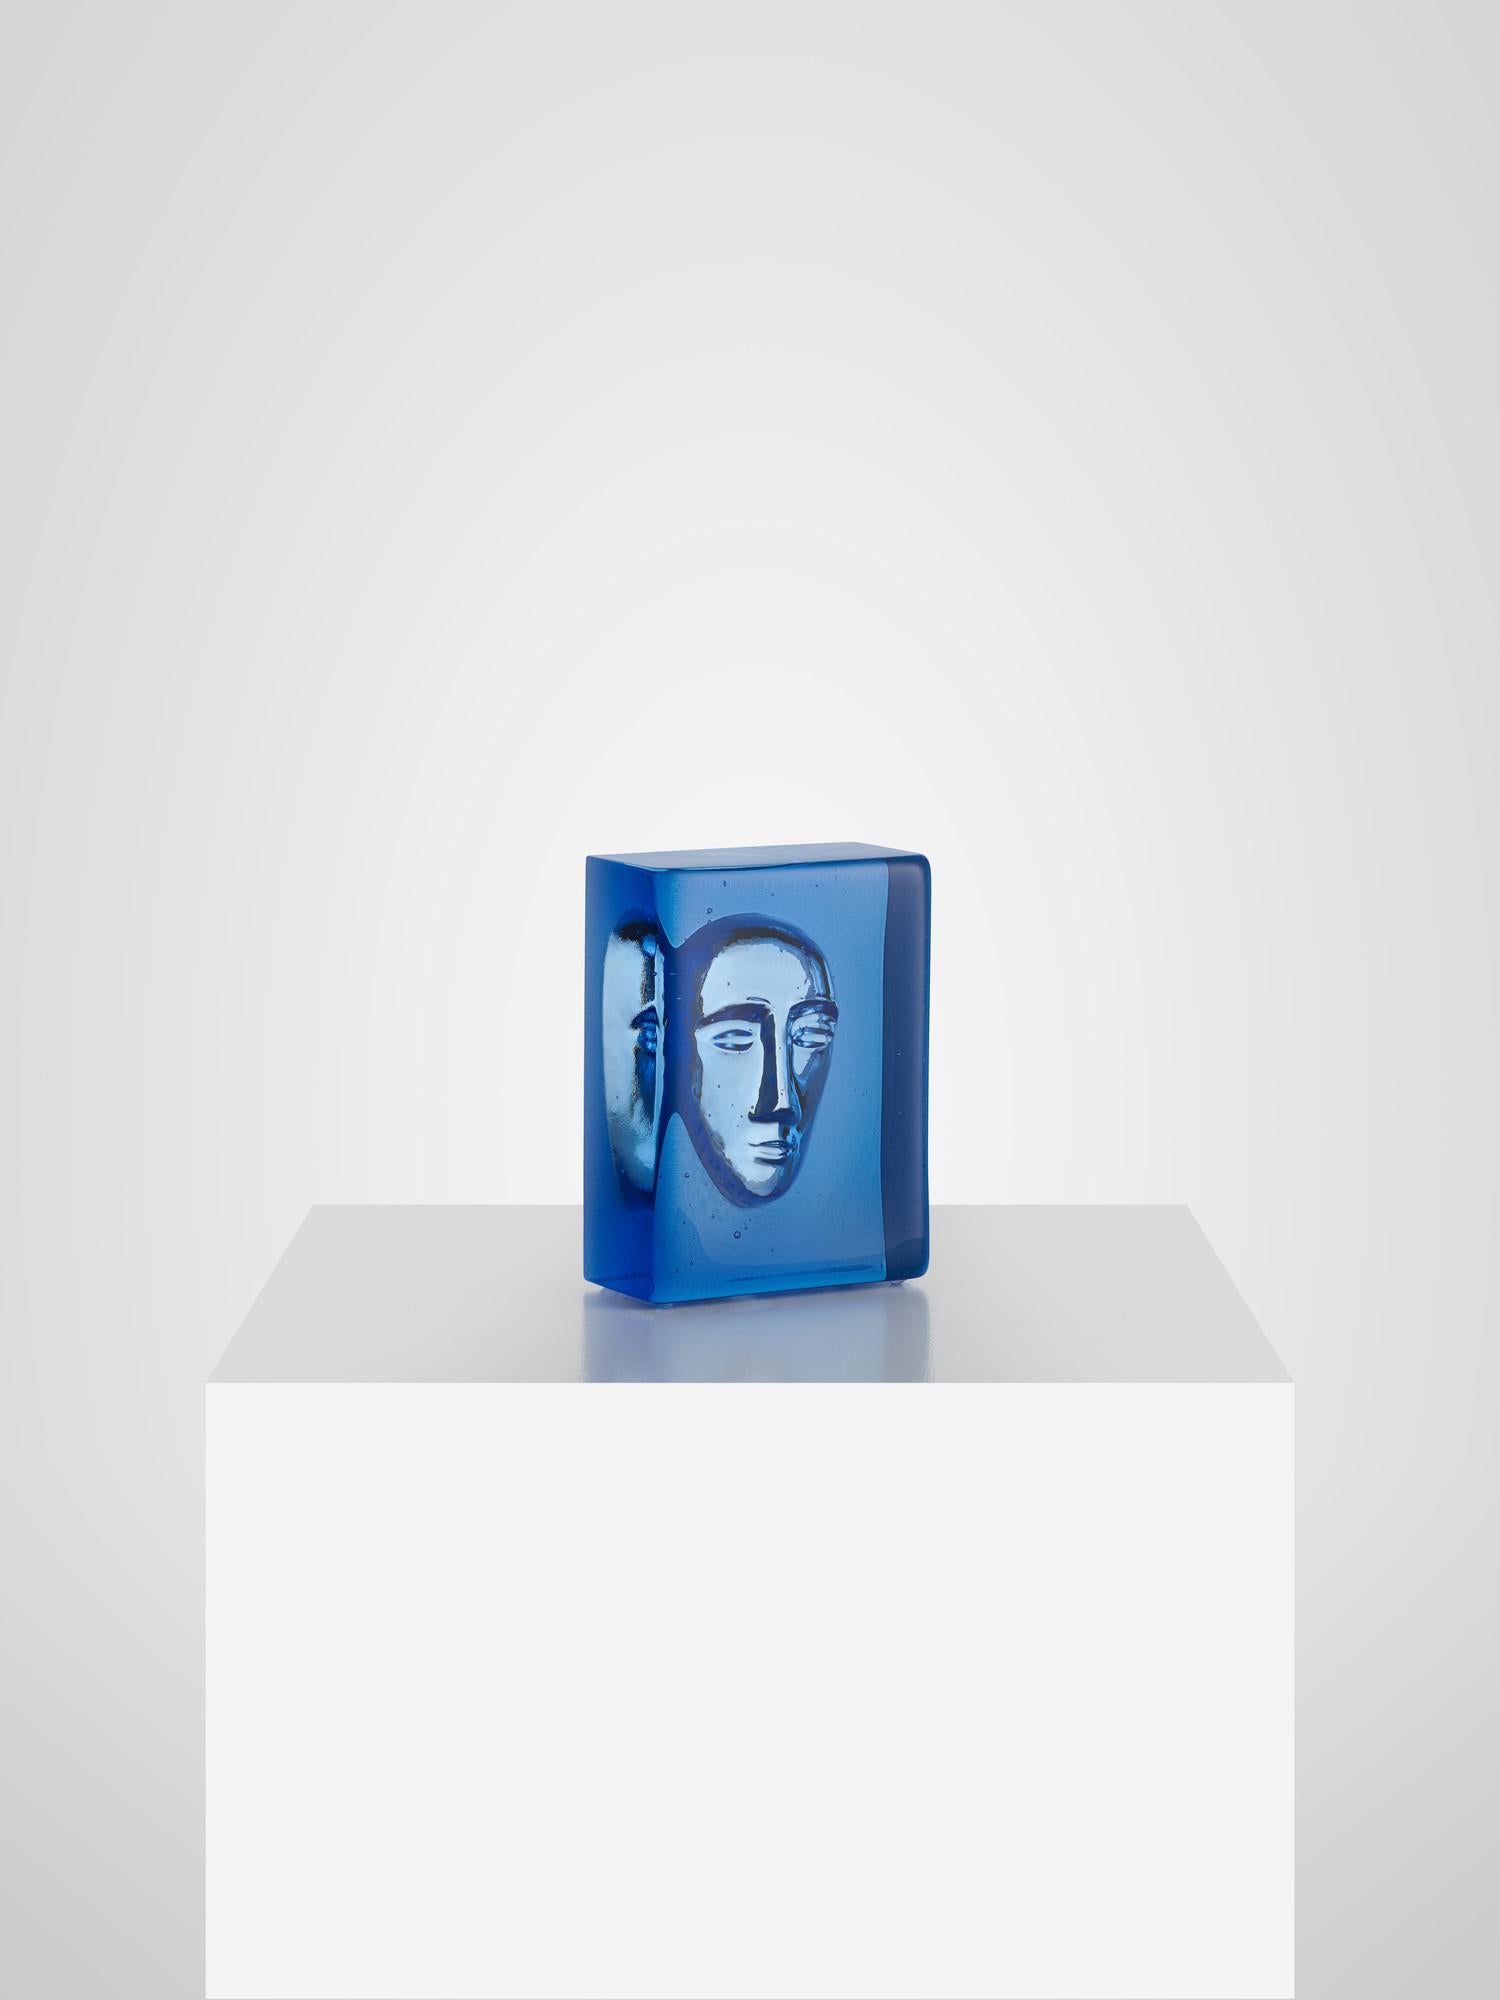 The renowned Swedish glass artist Bertil Vallien has created Azur Man. It is an exclusive art object in blue glass, cast in a charcoal mold, with an imprint of a face. The face is a recurring Bertil Vallien motif – one of his signatures, often seen